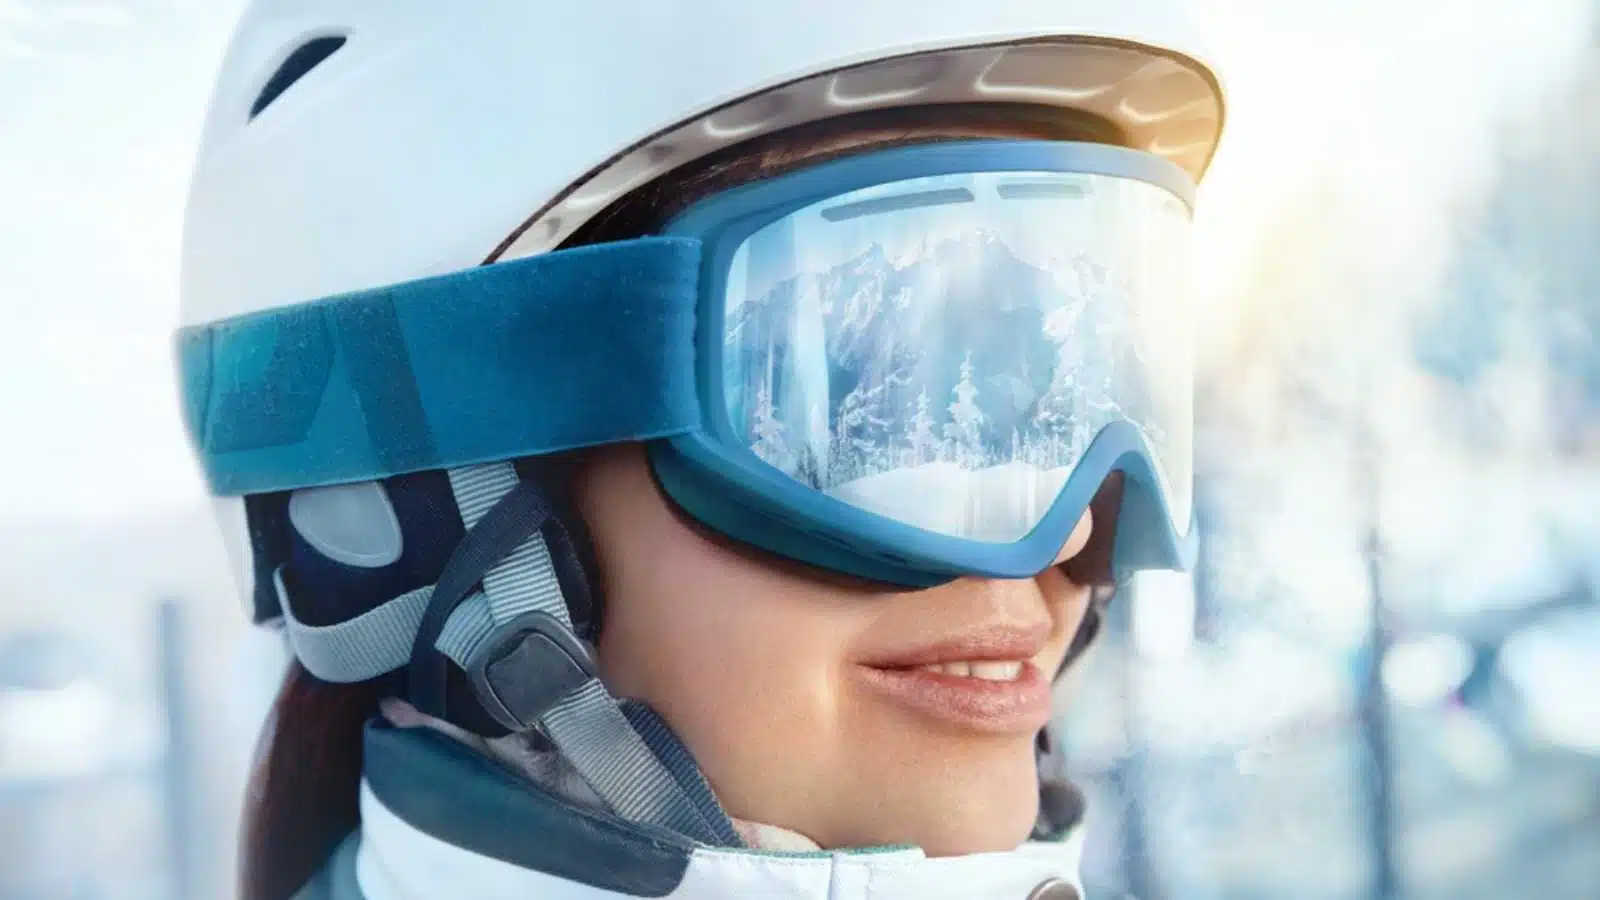 Close Up Of The Ski Goggles Of A Woman With The Reflection Of Snowed Mountains. Portrait Of Woman At The Ski Resort On The Background Of Mountains And Sky.